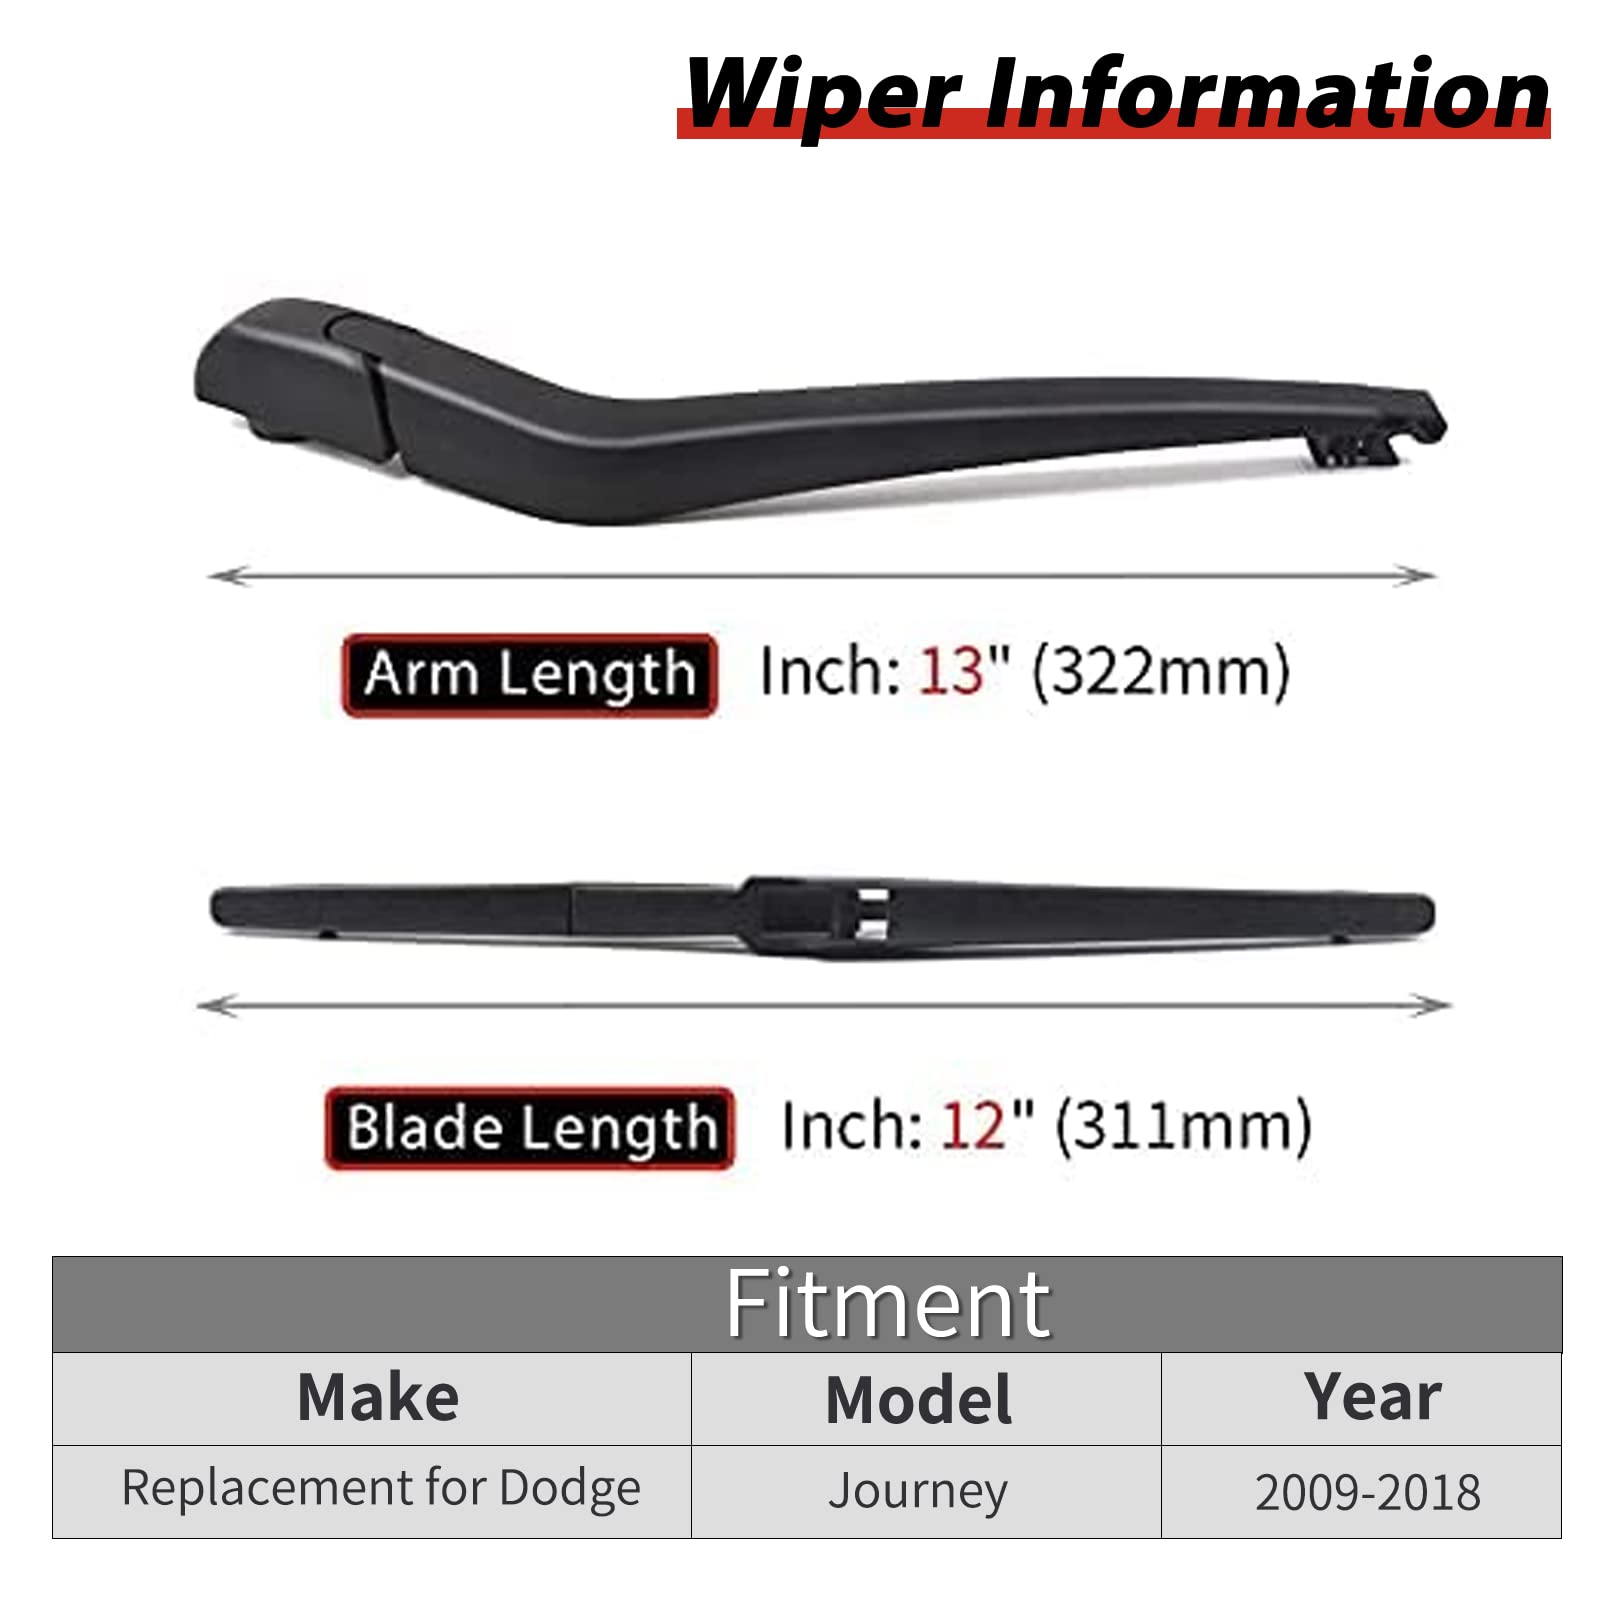 Replacement for Dodge Journey Vehicles, Rear Windshield Back Wiper Arm Blade Set - OTUAYAUTO Factory OEM Replacement 68040371AA